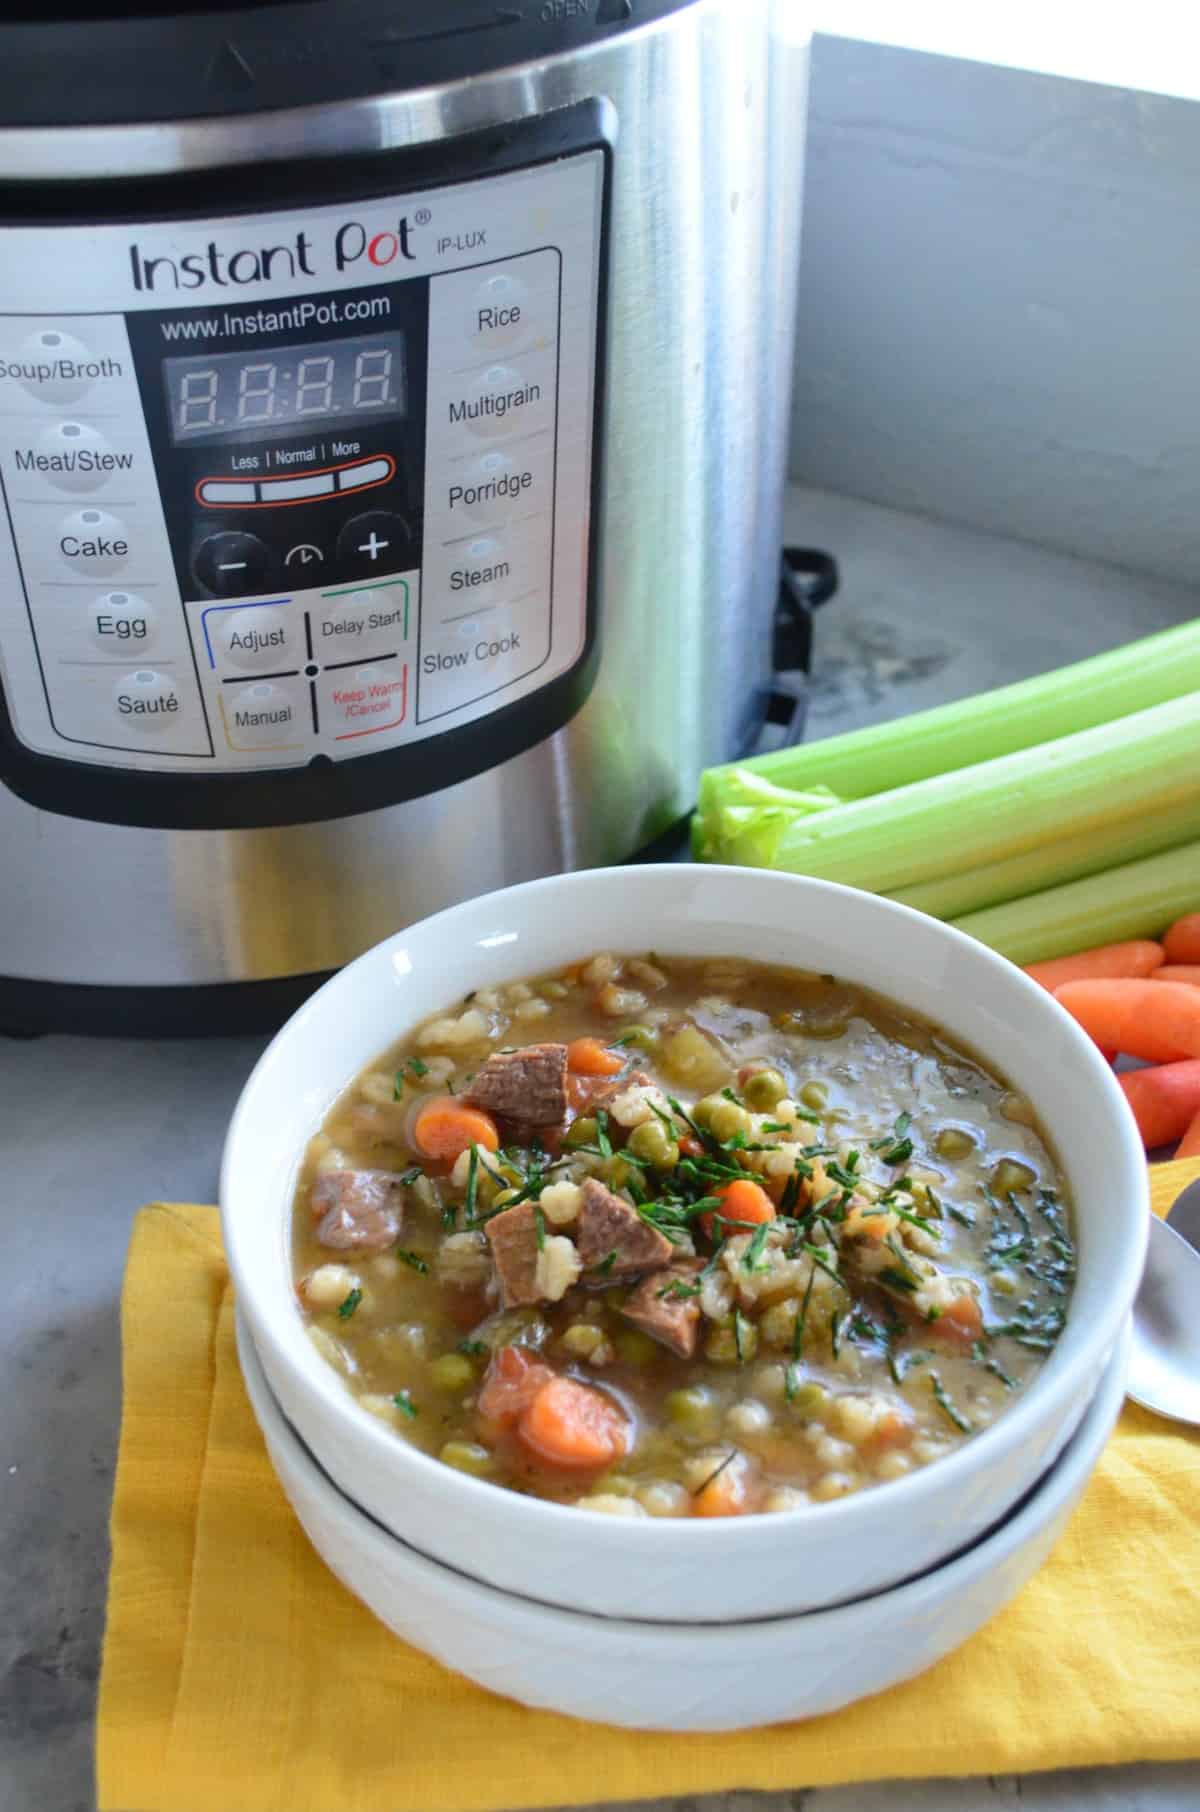 top view of bowl of brown soup with barley, beef, peas, carrots, celery and herbs in front of instant pot.